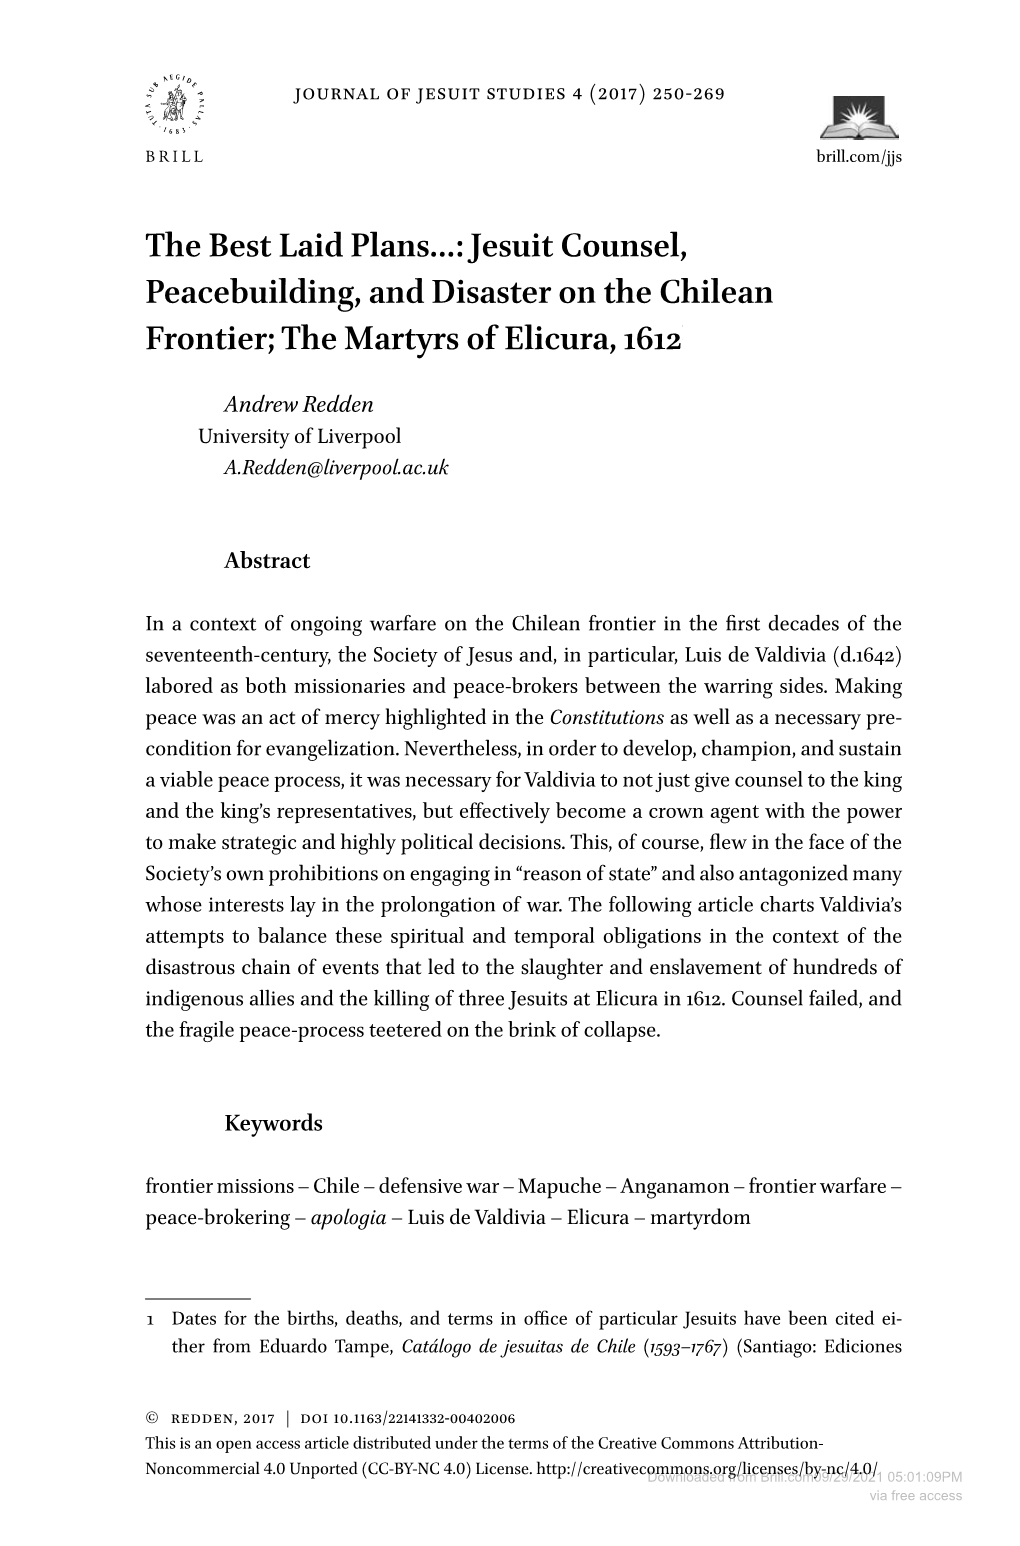 The Best Laid Plans…: Jesuit Counsel, Peacebuilding, and Disaster on the Chilean Frontier; the Martyrs of Elicura, 16121